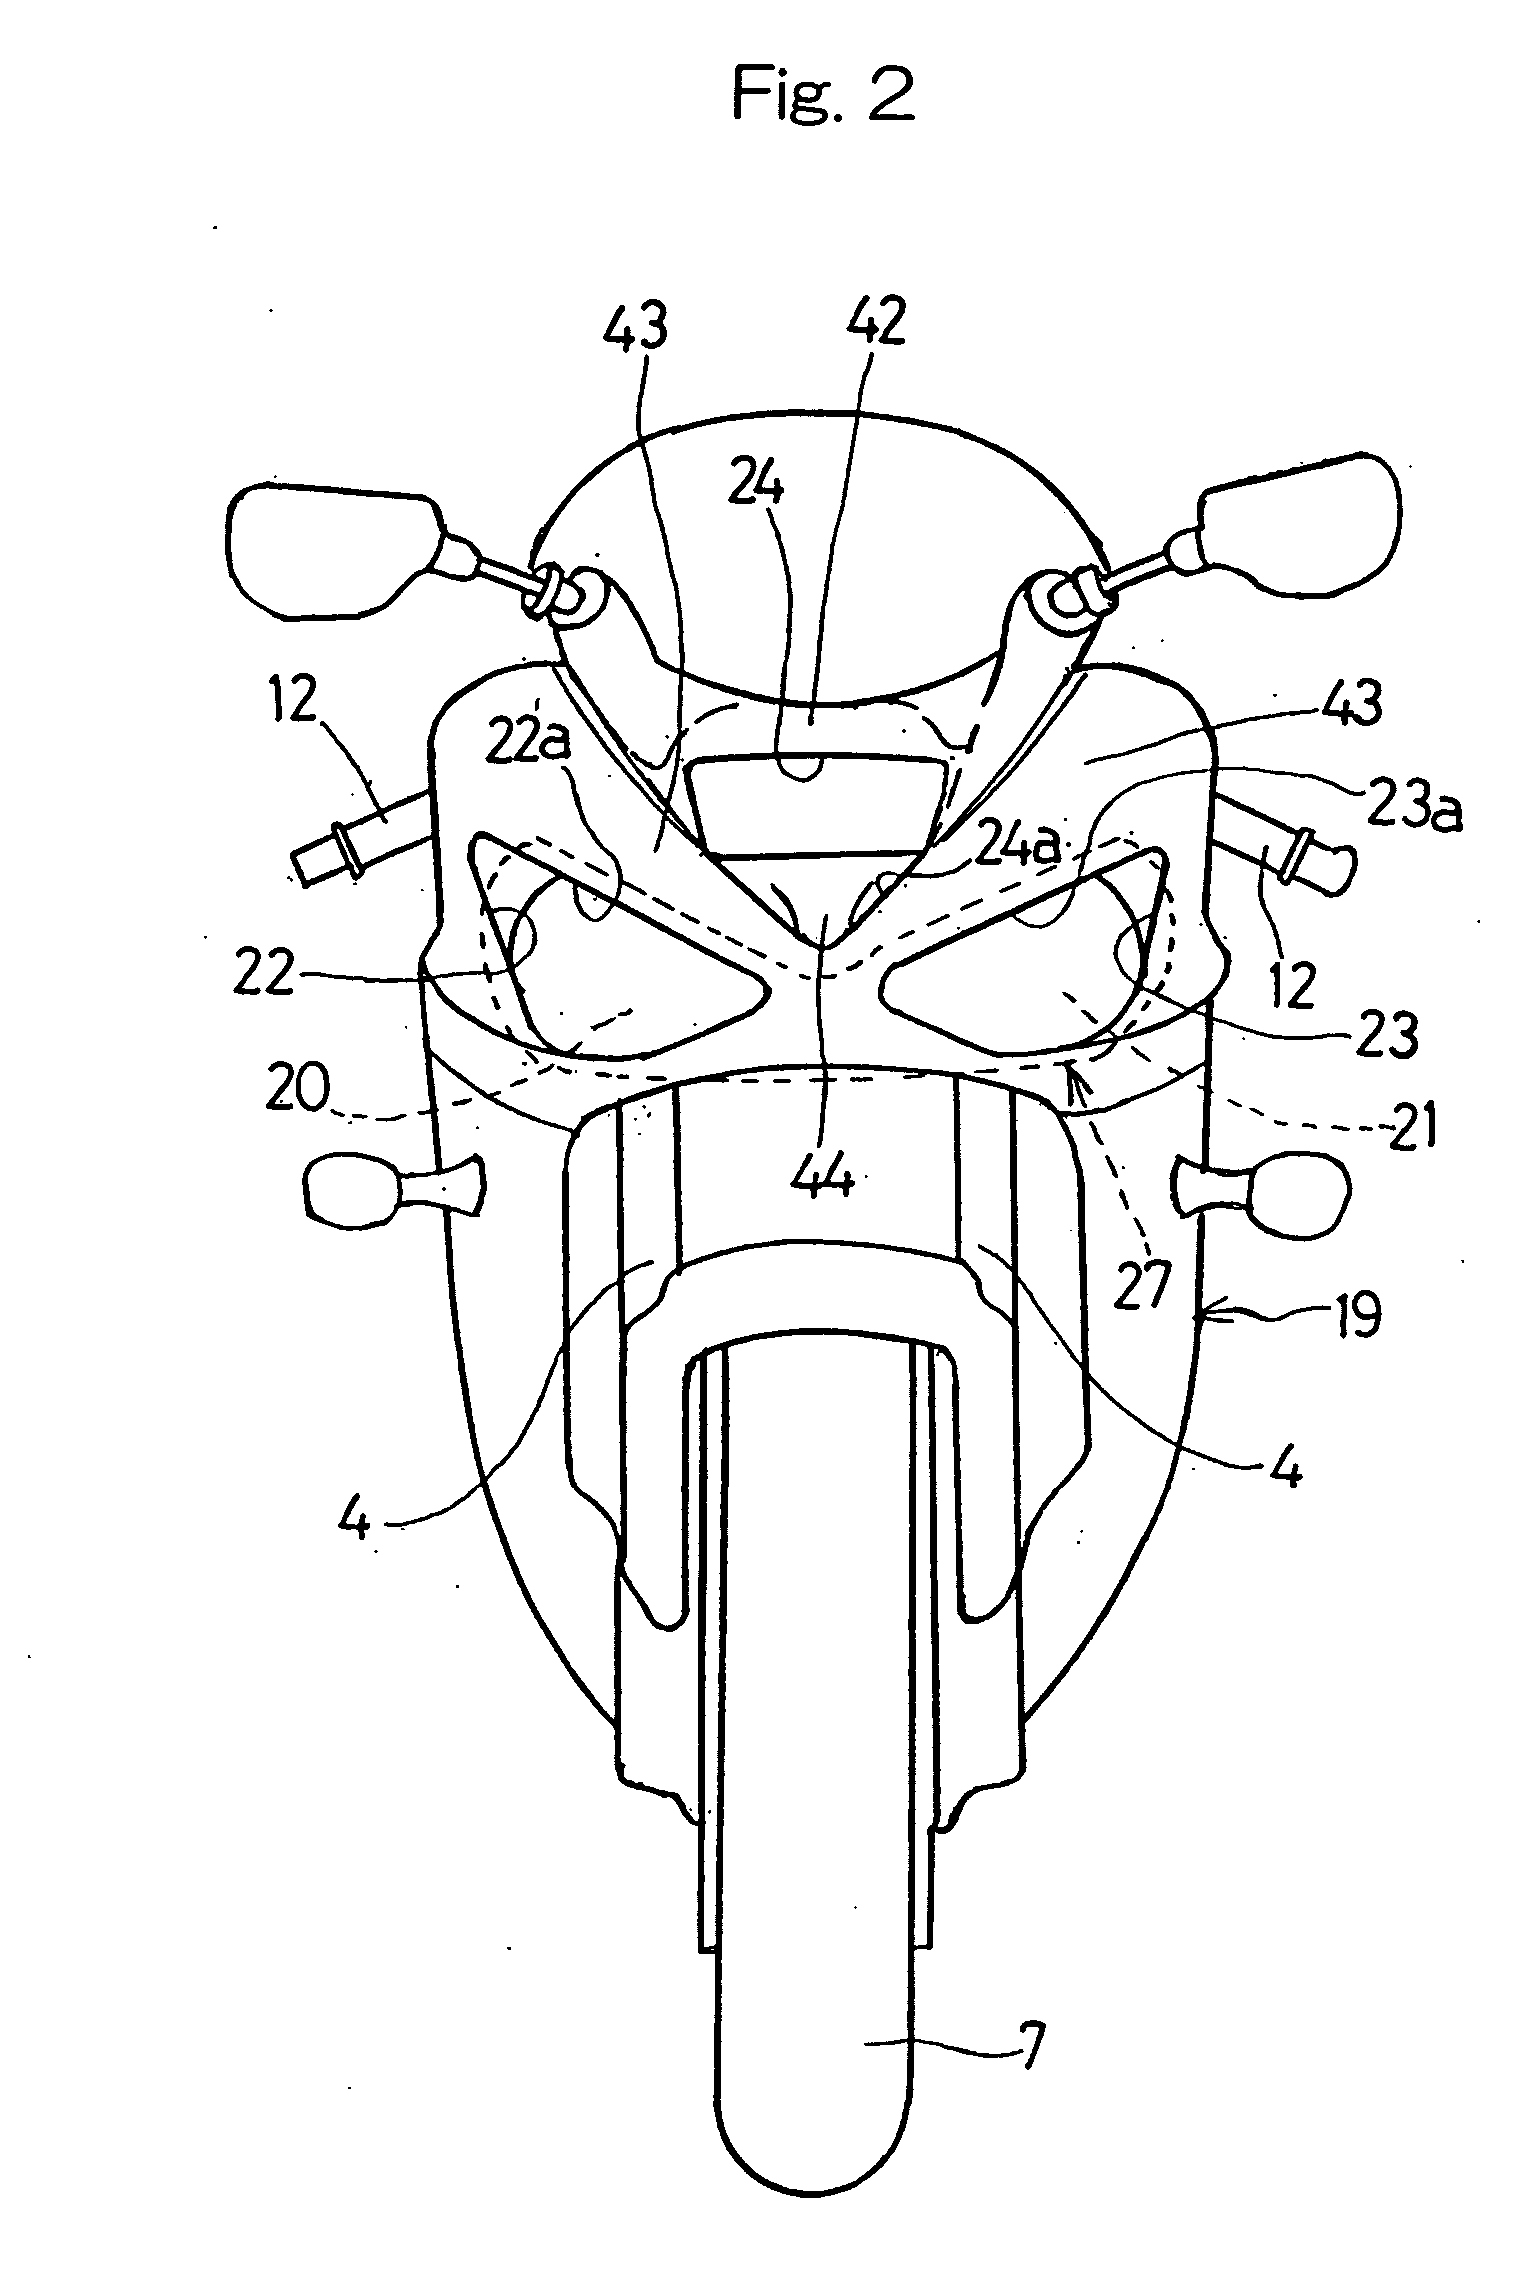 Air intake system for vehicle combustion engine